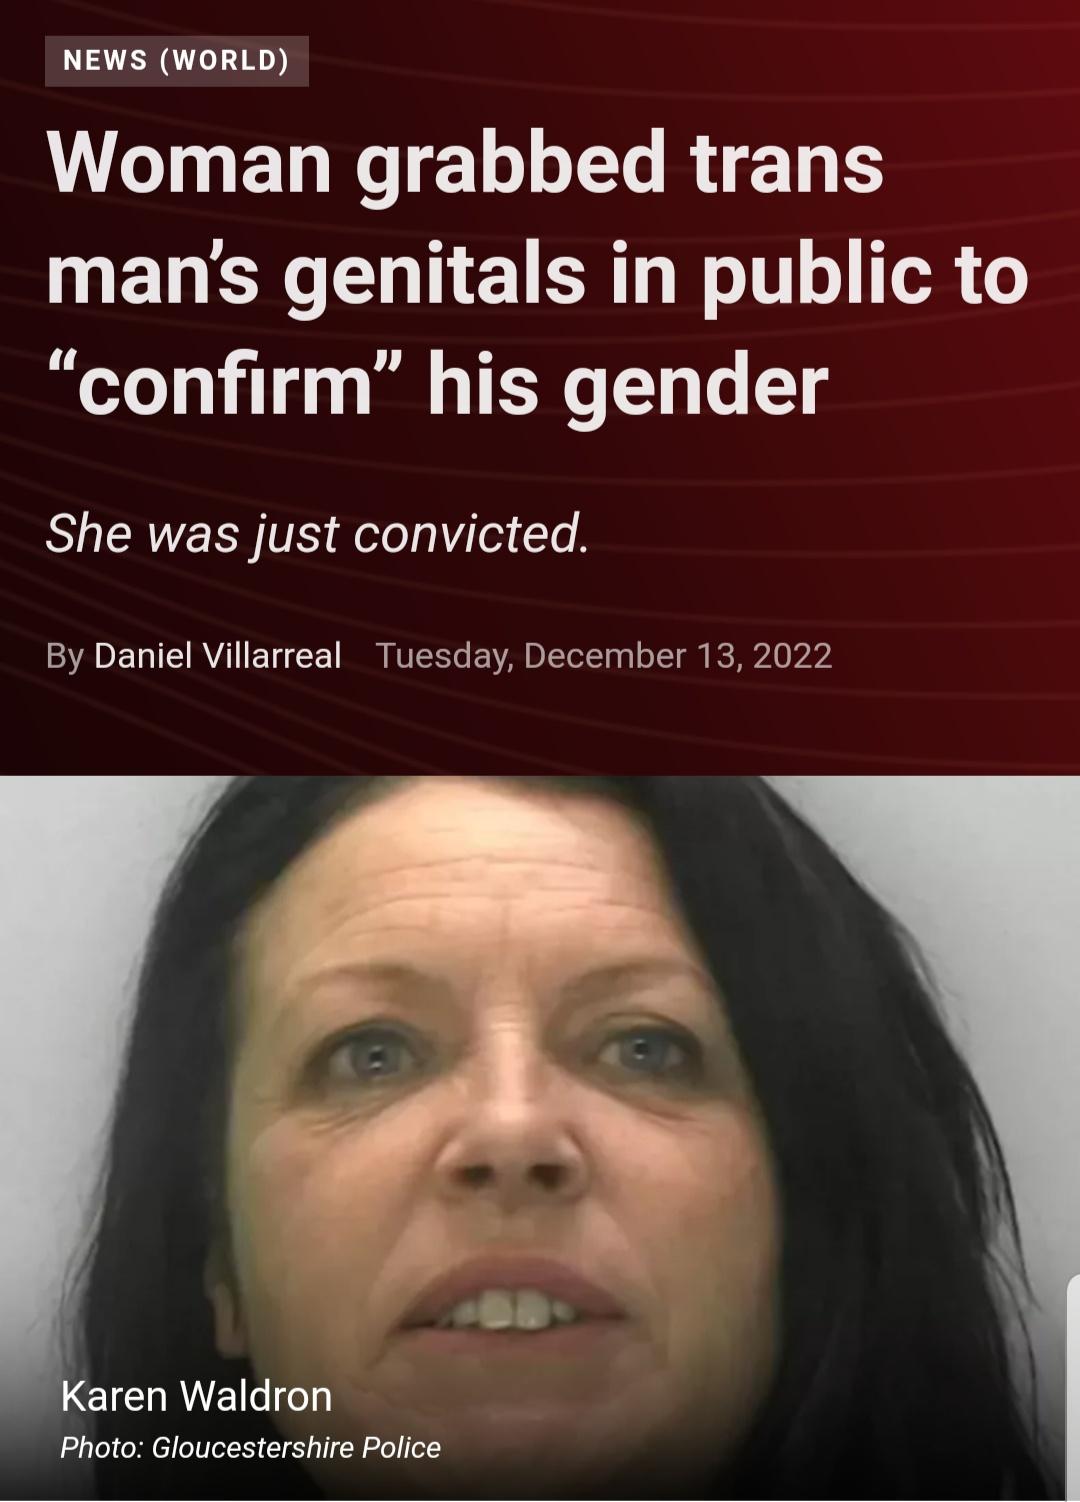 Lady grabbed trans man’s genitals in public to “confirm” his gender